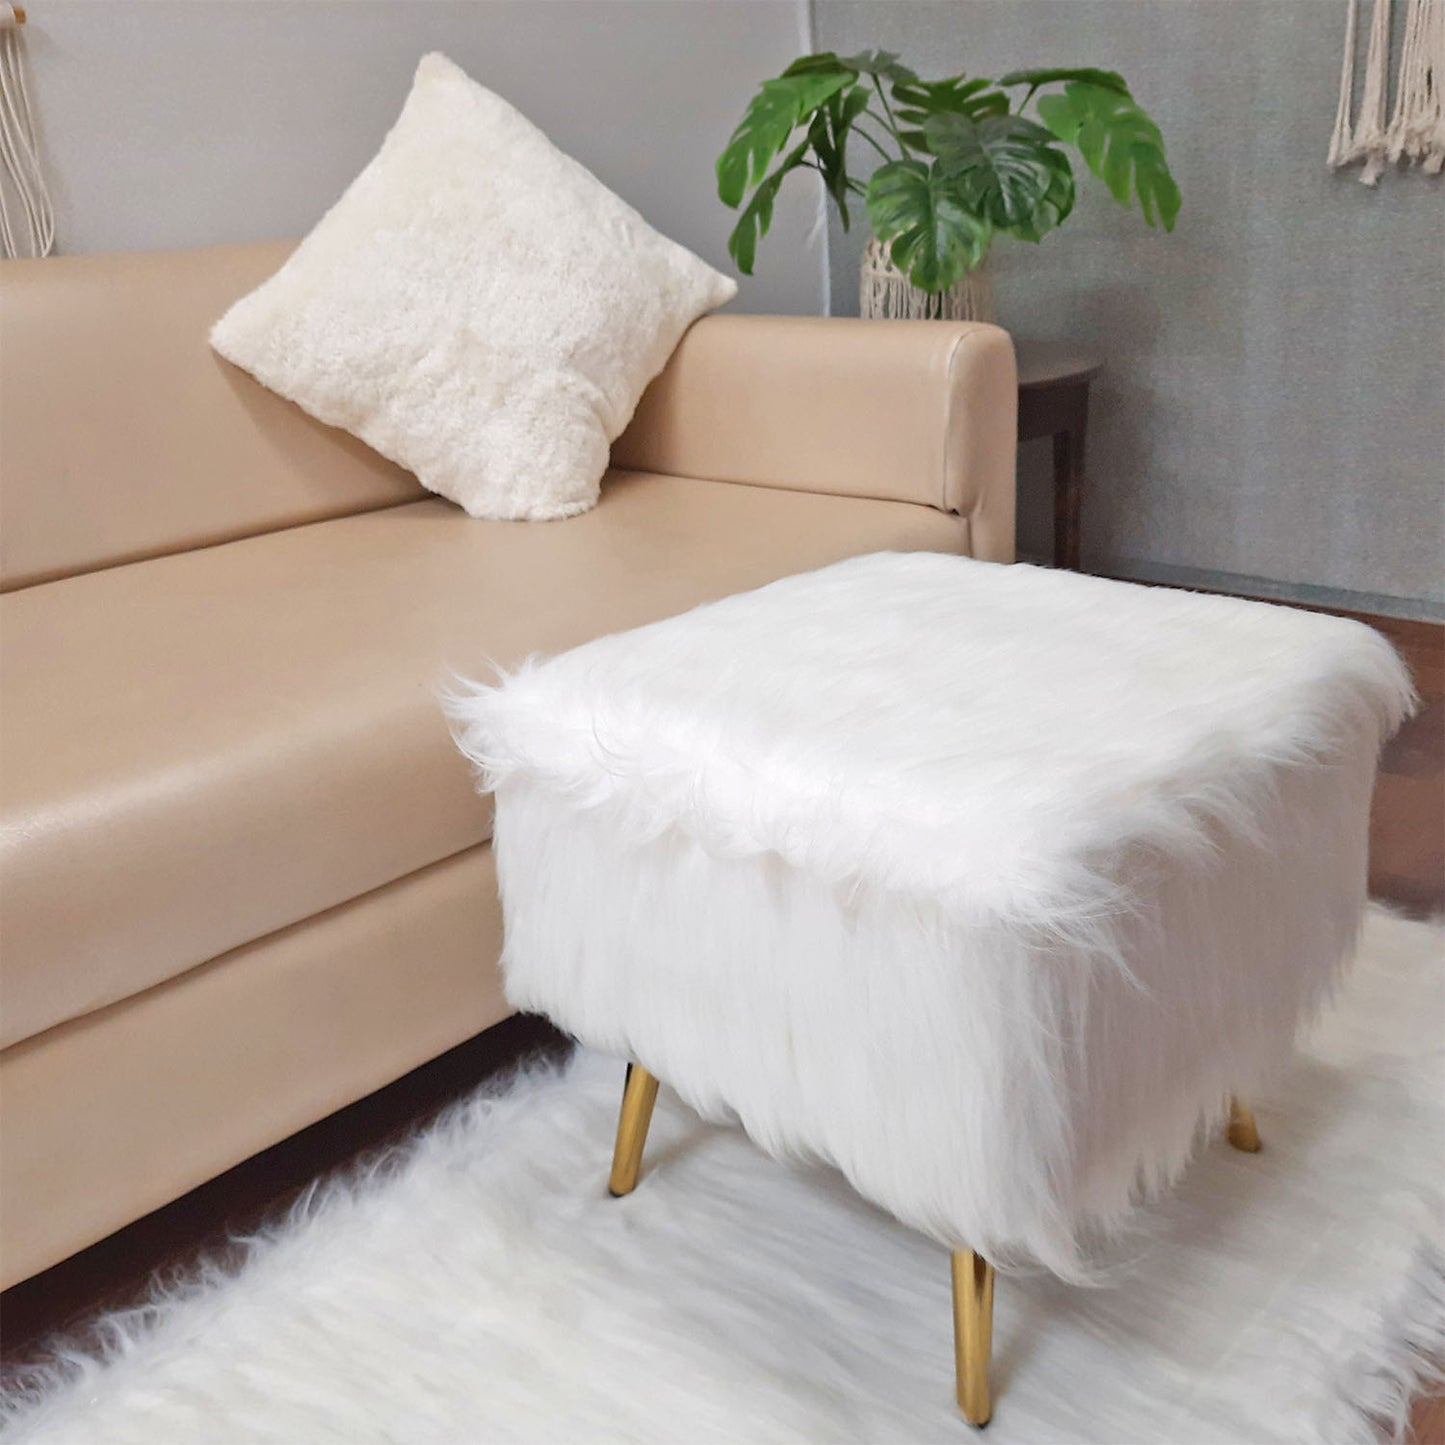 Noviato Collection – White Premium Long Faux Fur Footstool Gold Metal Legs Modern On-Trend Style Square Multi-Functional Ottoman Stool Seat, 40 cm Tall | from Avioni